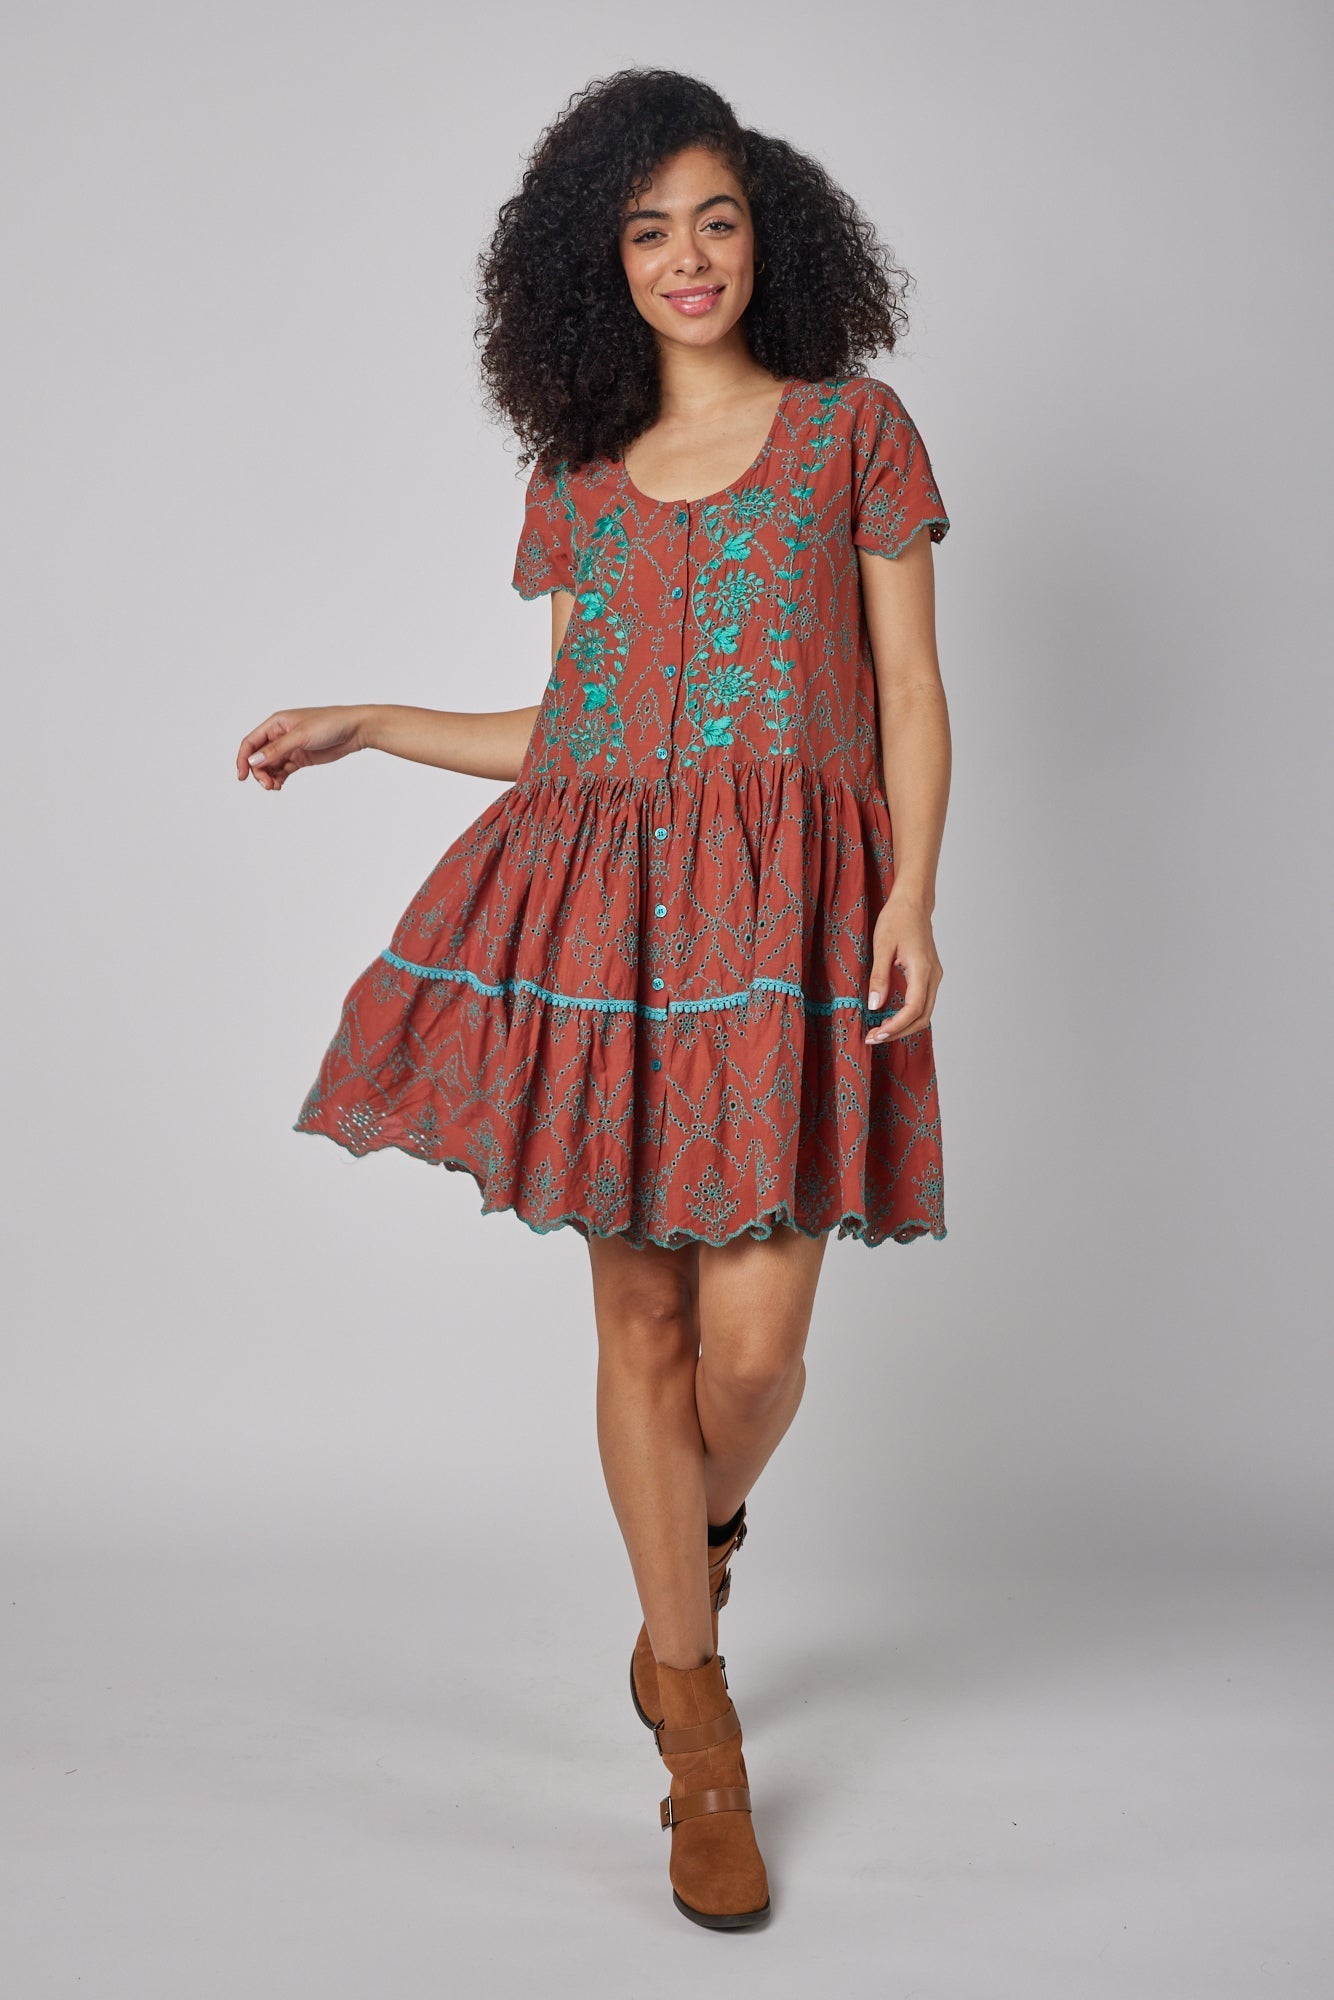 ModaPosa Simonetta Short Sleeve Hand Embroidered Eyelet Dress. Shop women's resort and lifestyle clothing inspired by the Mediterranean, Italy.